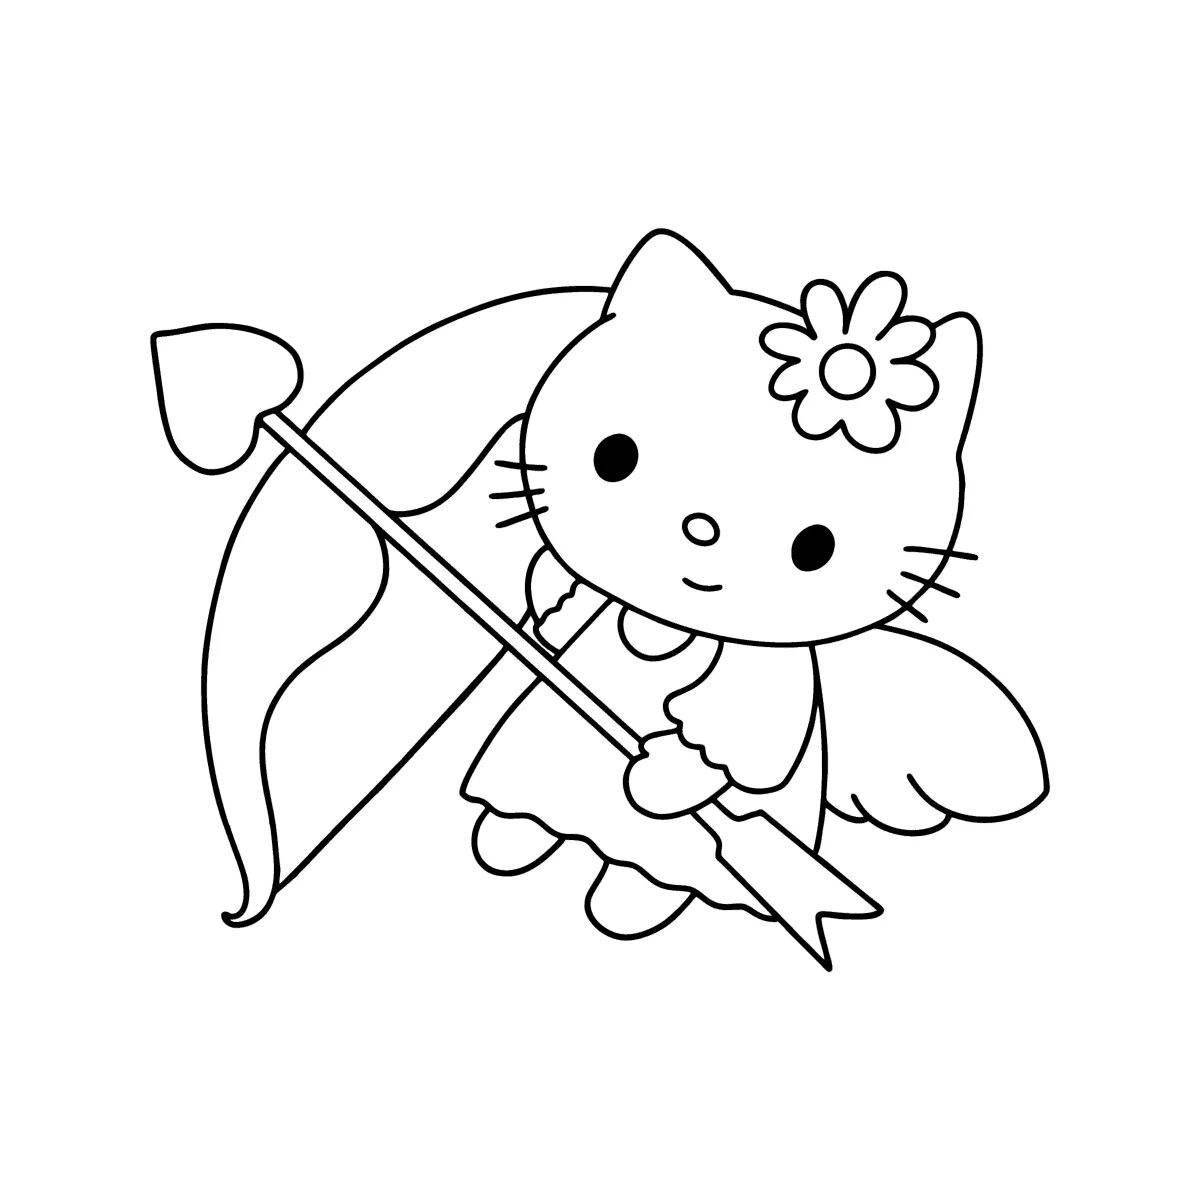 Bright hello kitty frog coloring page